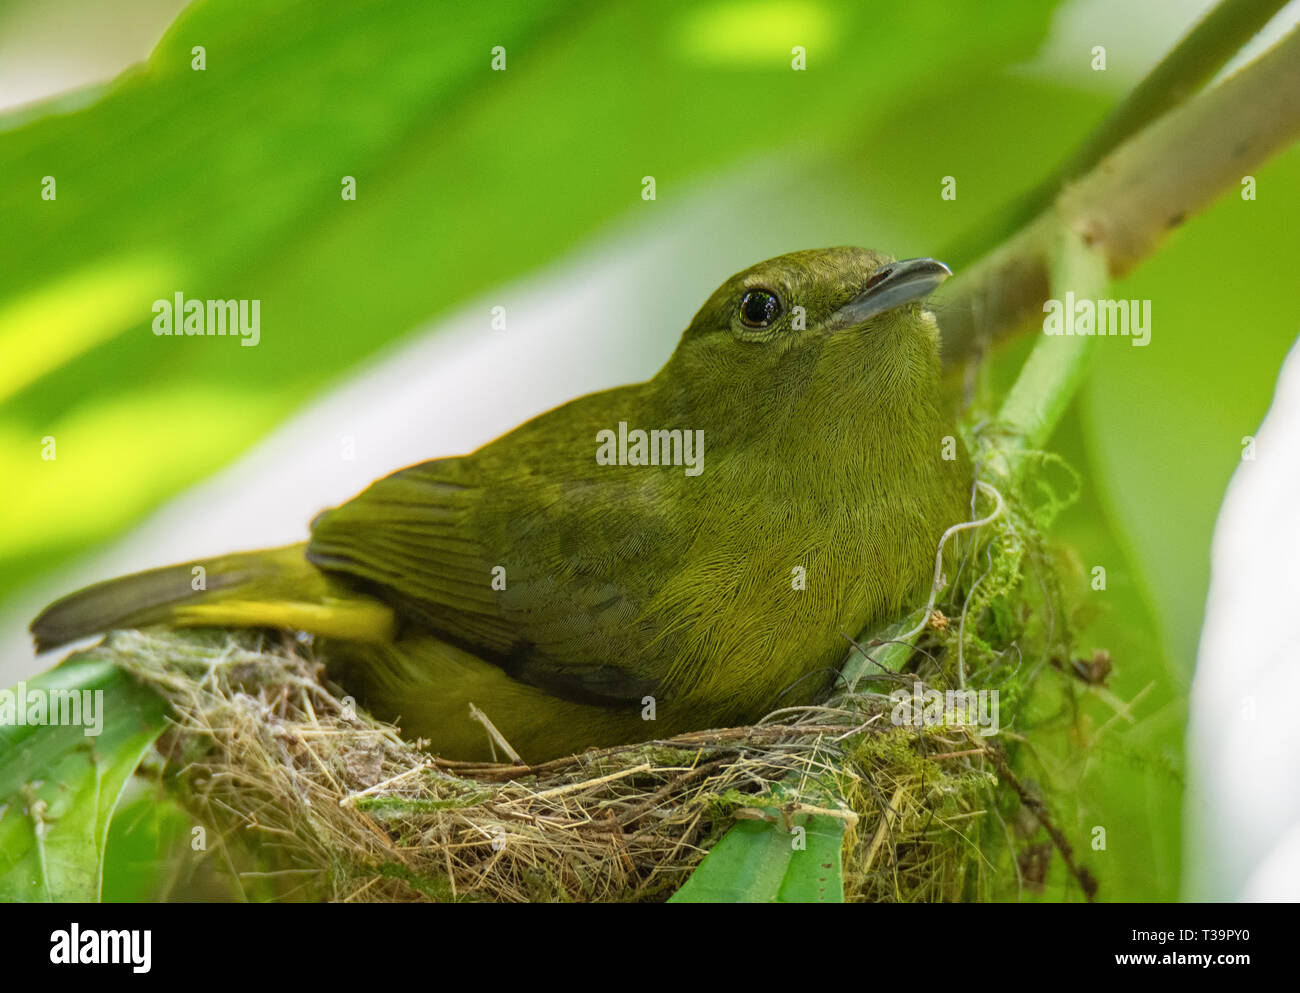 Female White-collared Manakin sitting on nest made from small bits of grass Stock Photo